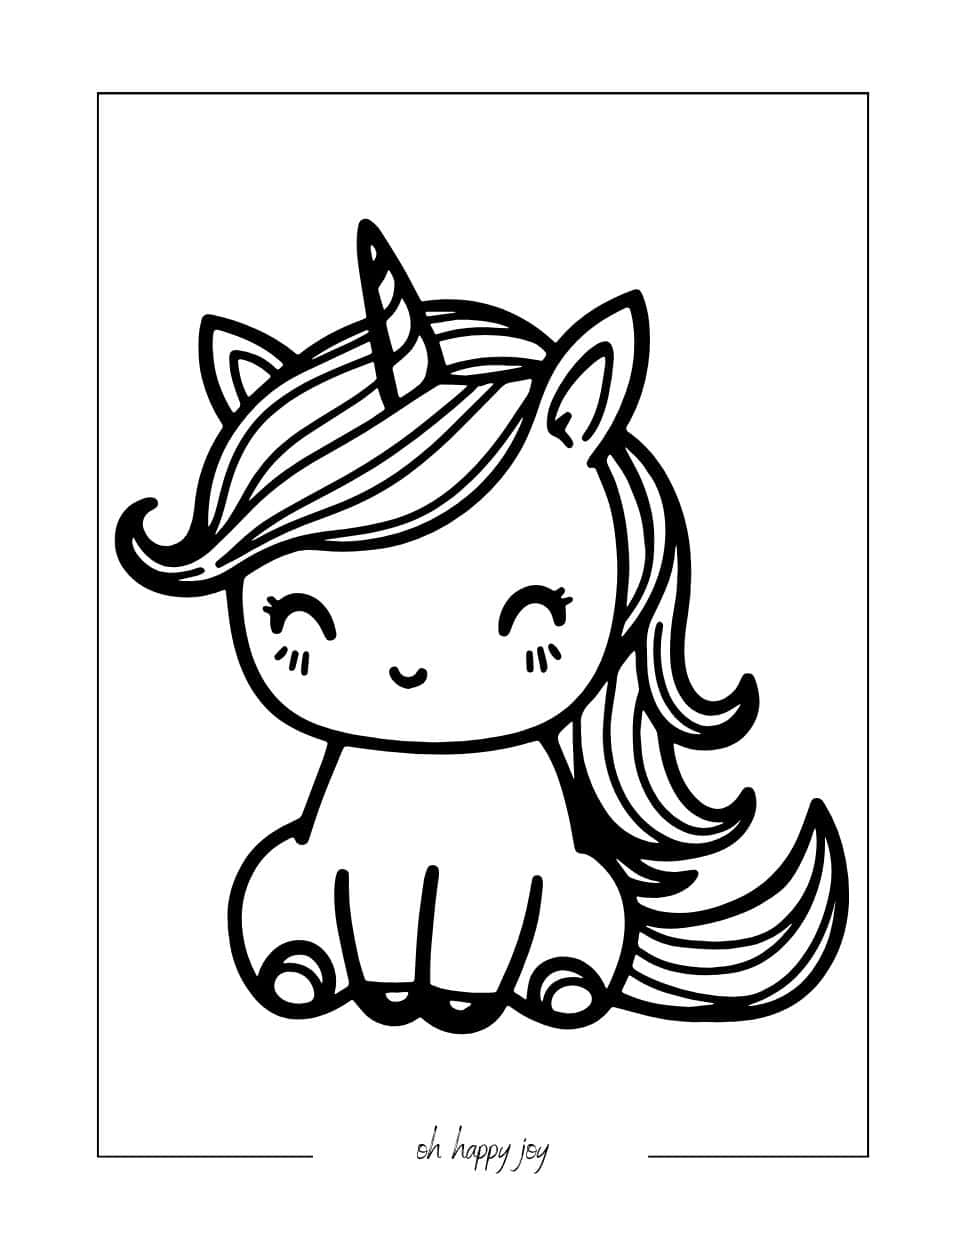 Cute Unicorn Free Coloring Page